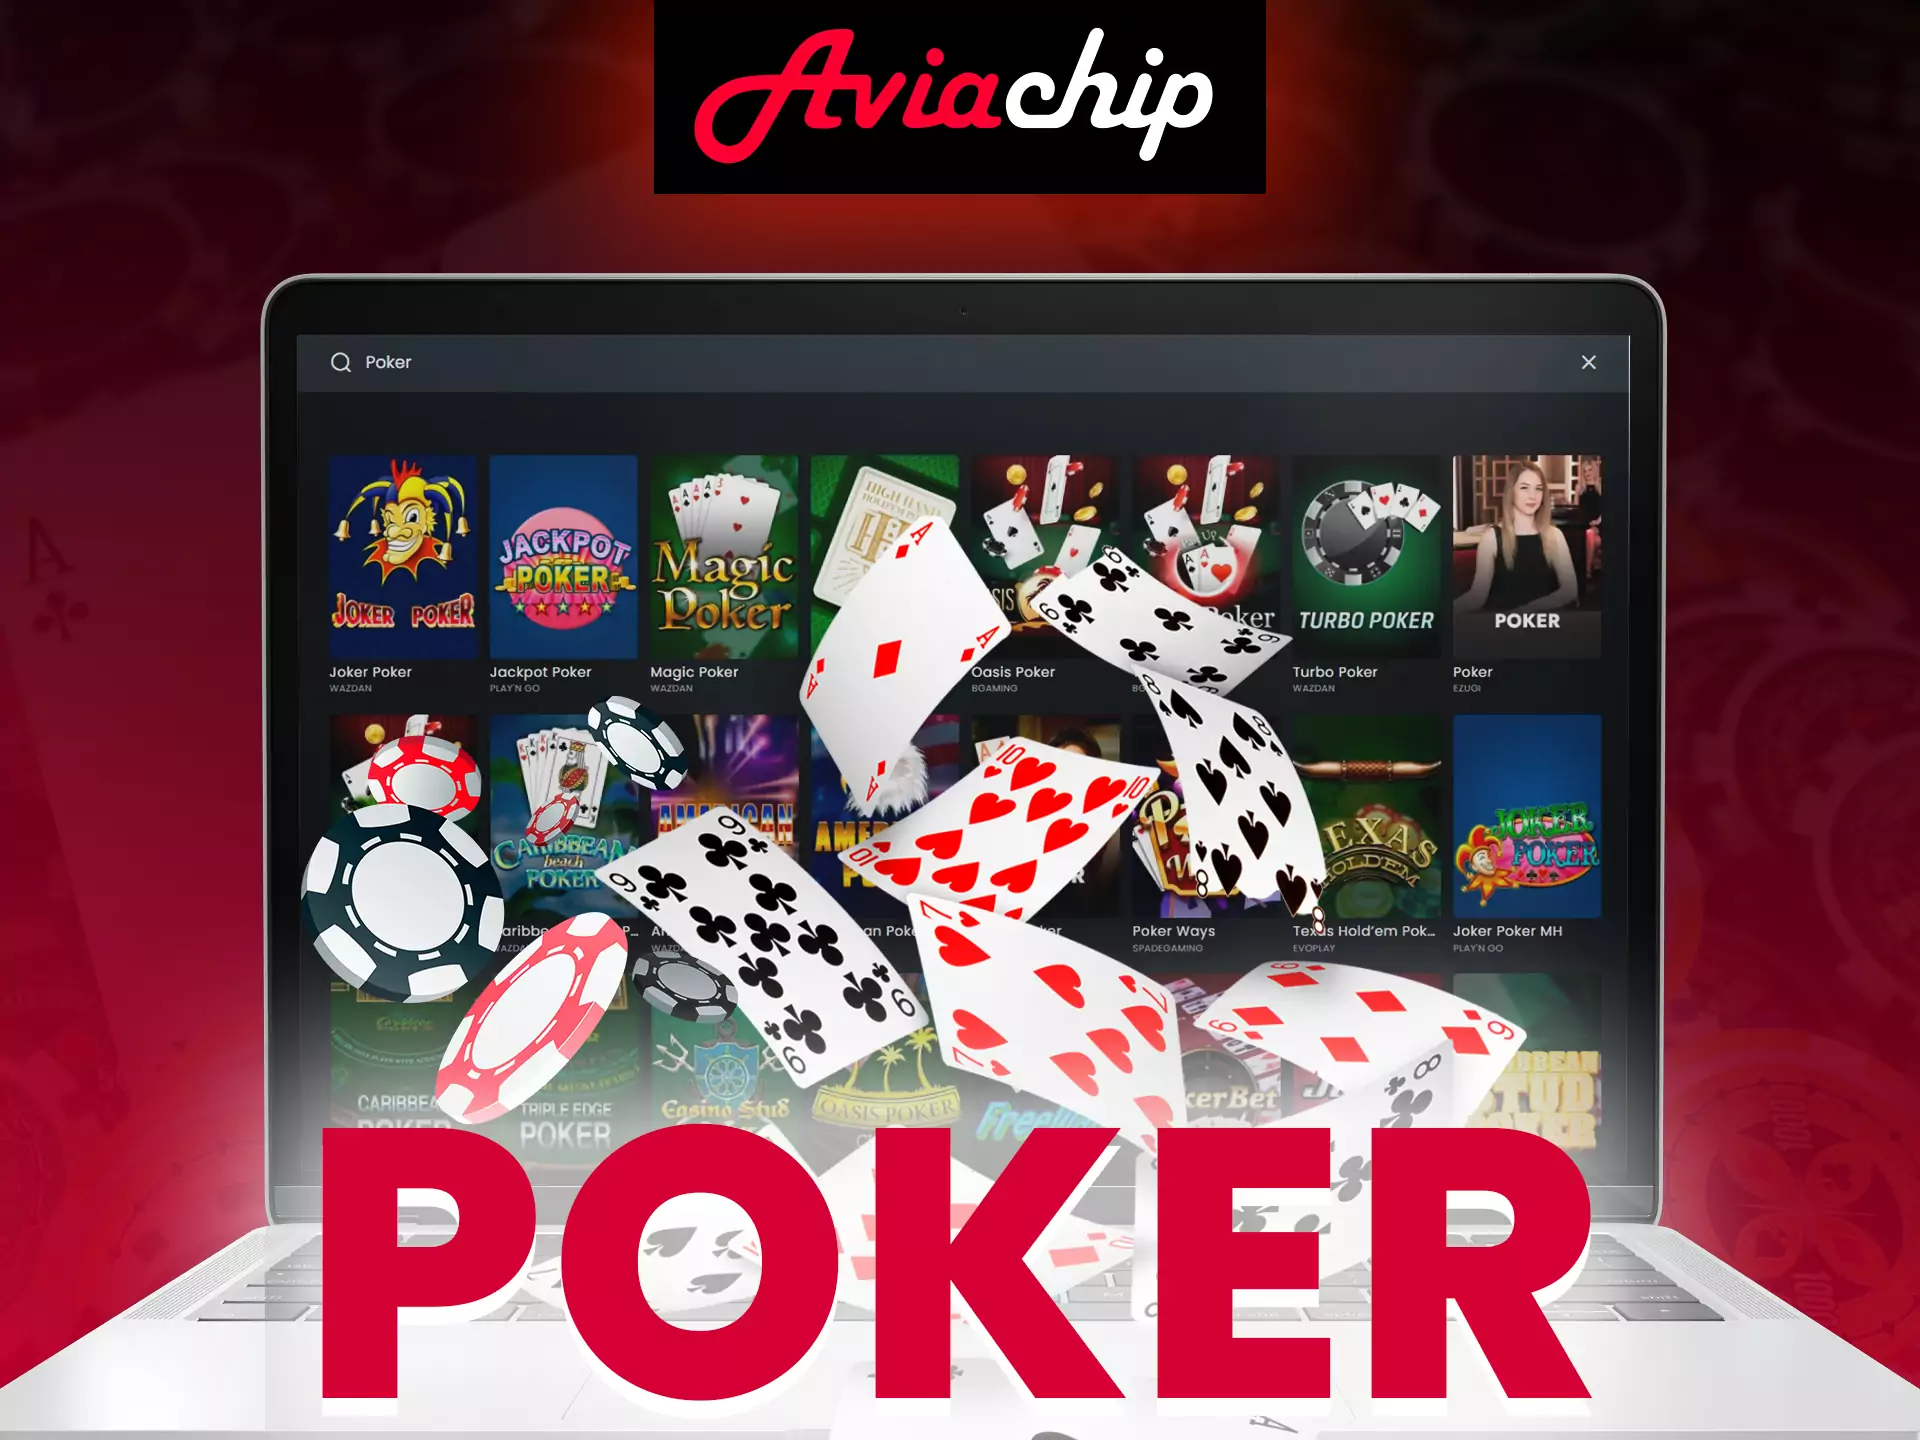 At Aviachip, play poker if you're a fan of the game.